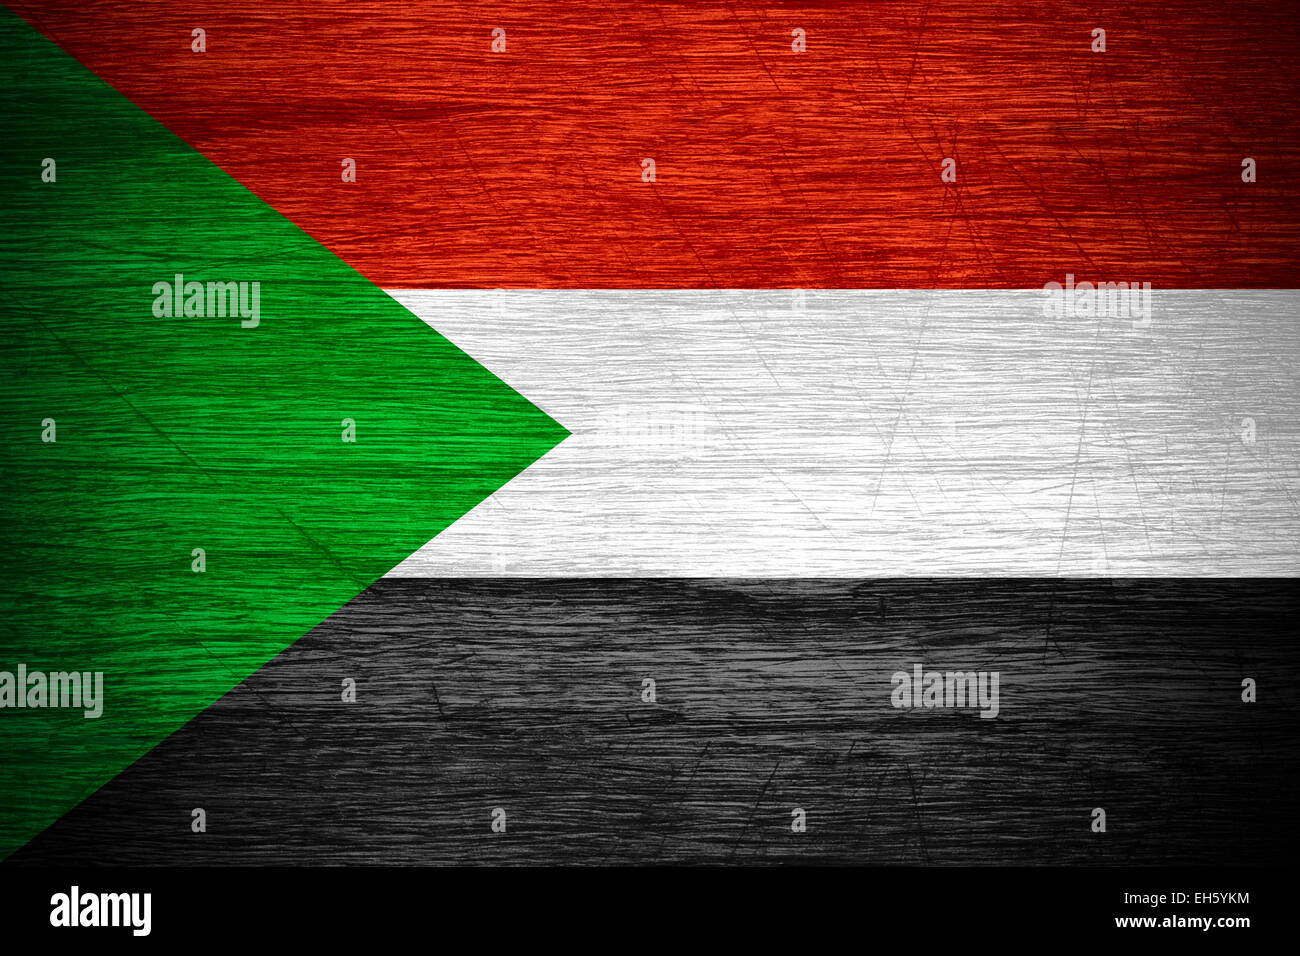 Sudan flag or Sudanese banner on wooden texture Stock Photo